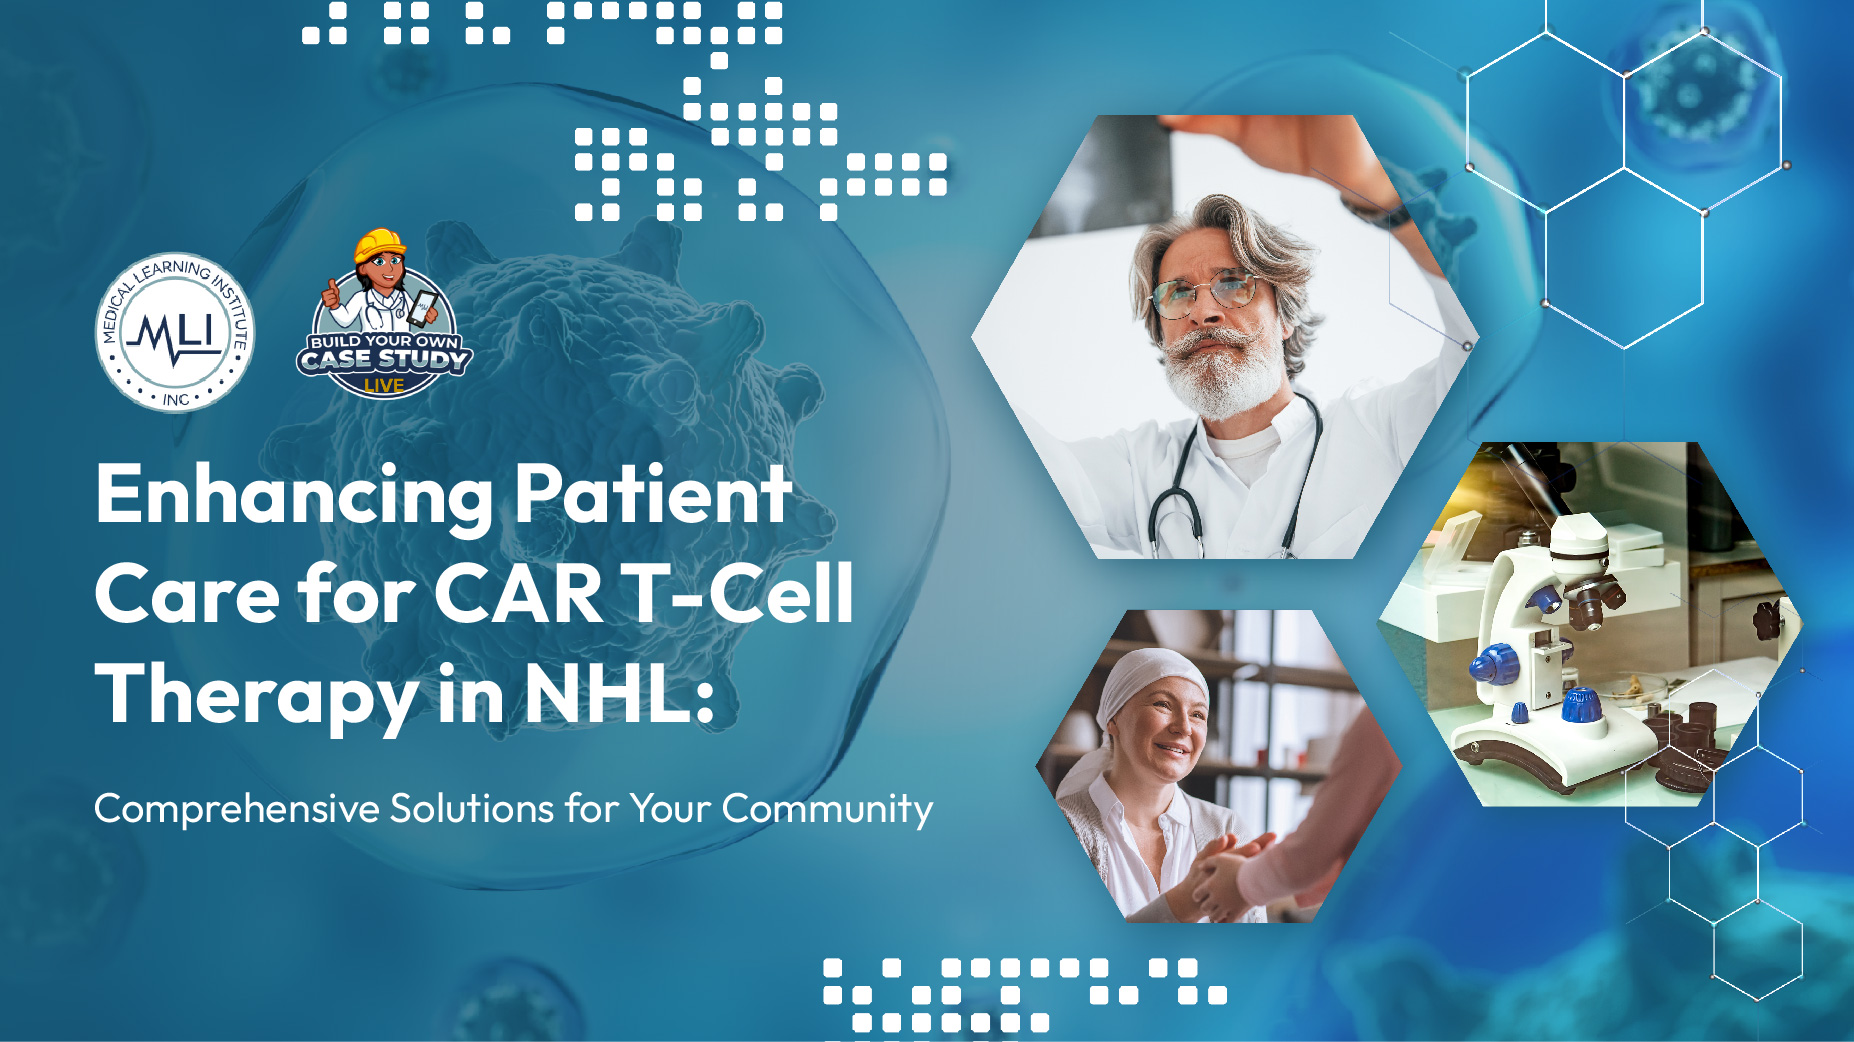 Enhancing Patient Care for CAR T-Cell Therapy in NHL: Comprehensive Solutions for Your Community